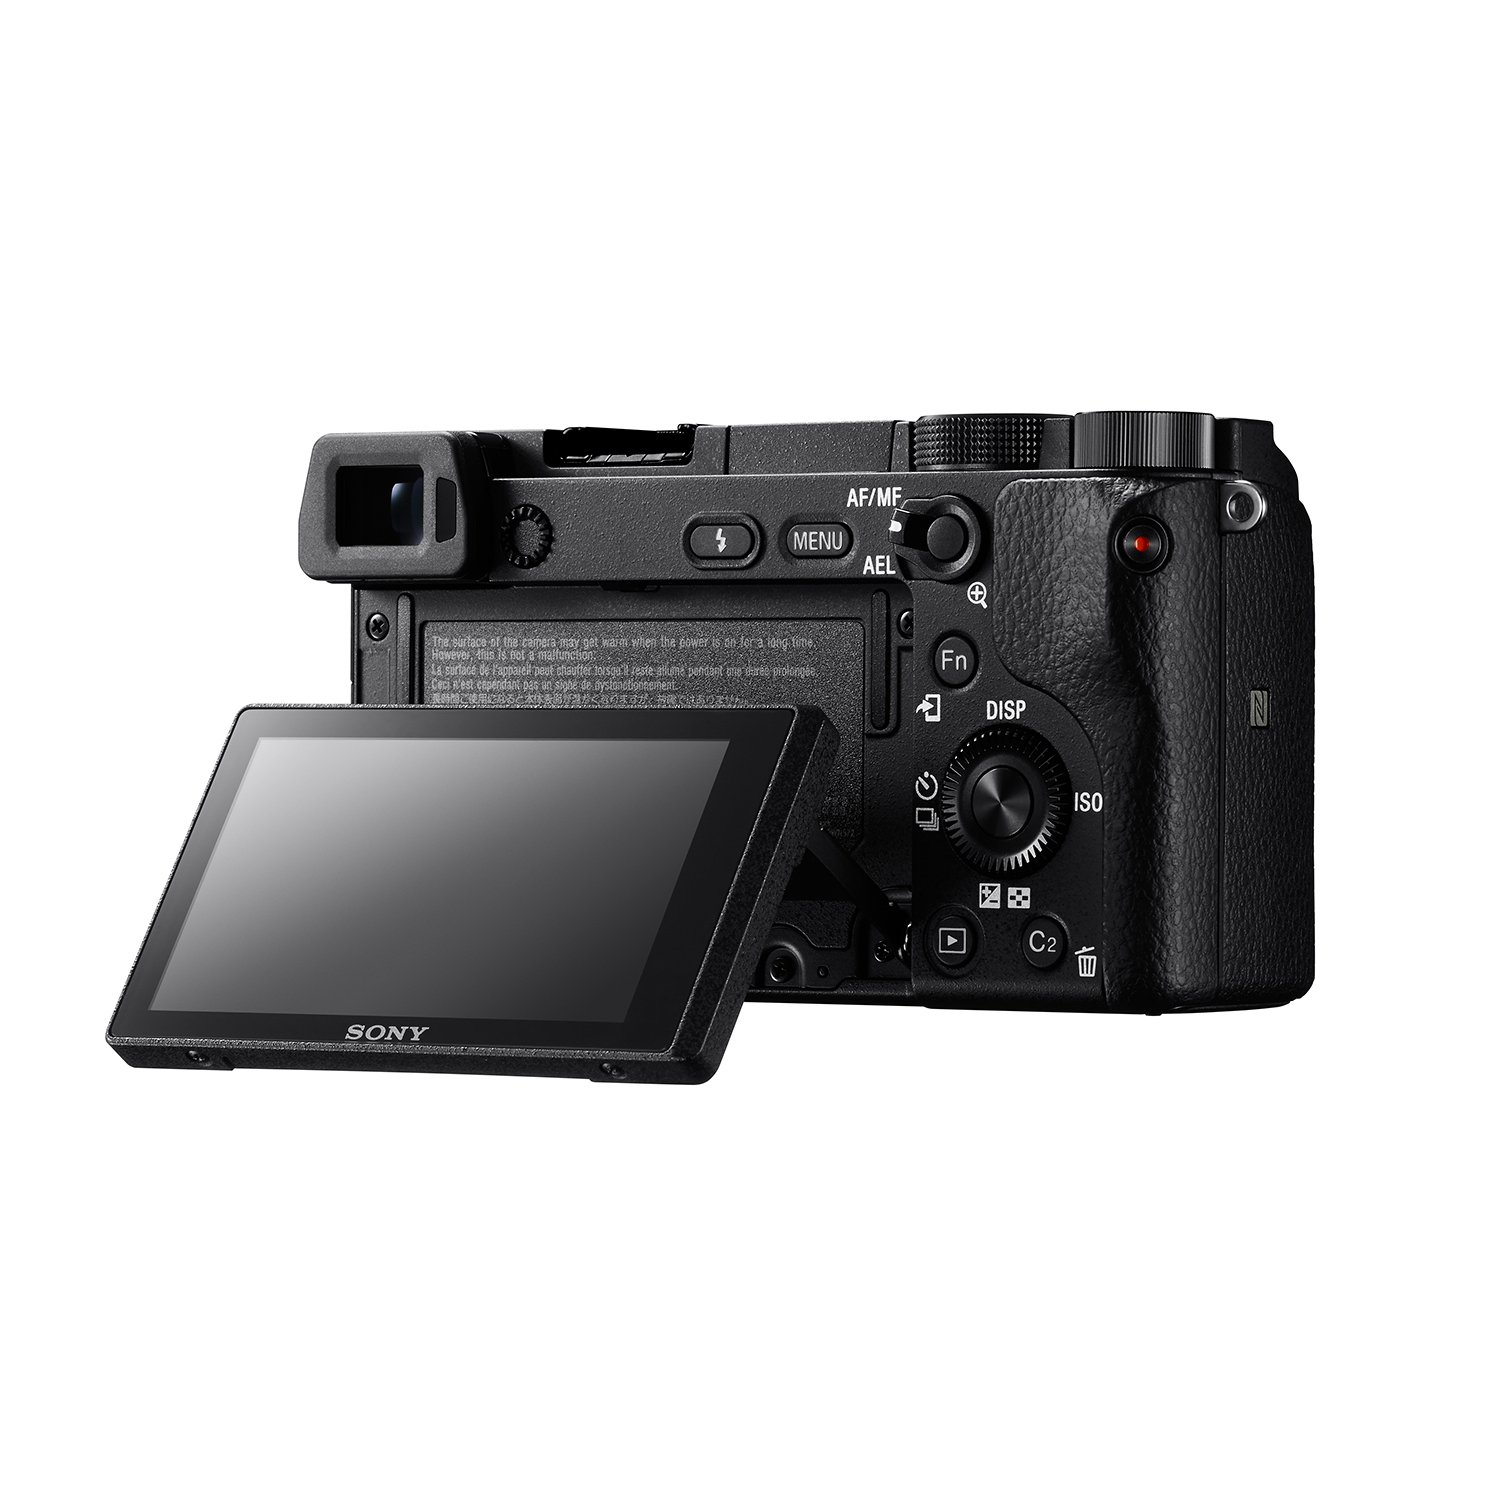 Sony Alpha a6300 ILCE6300M/B 24.2 MP Mirrorless Digital Camera with F3.5-5.6 OSS Zoom Lens, E 18-135mm, Black